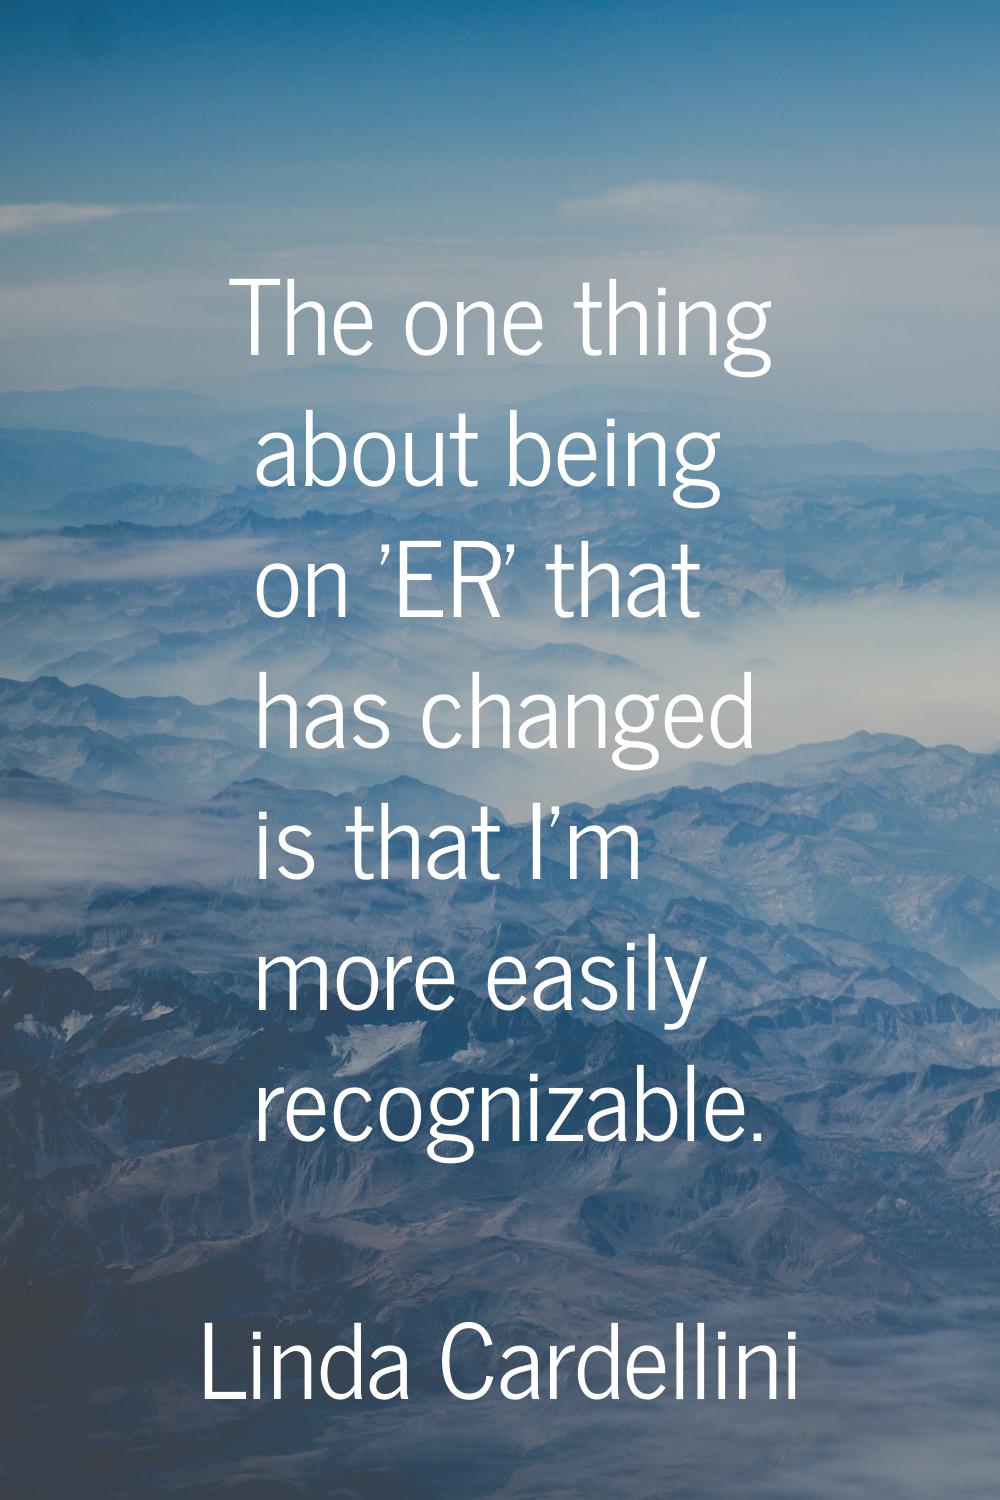 The one thing about being on 'ER' that has changed is that I'm more easily recognizable.